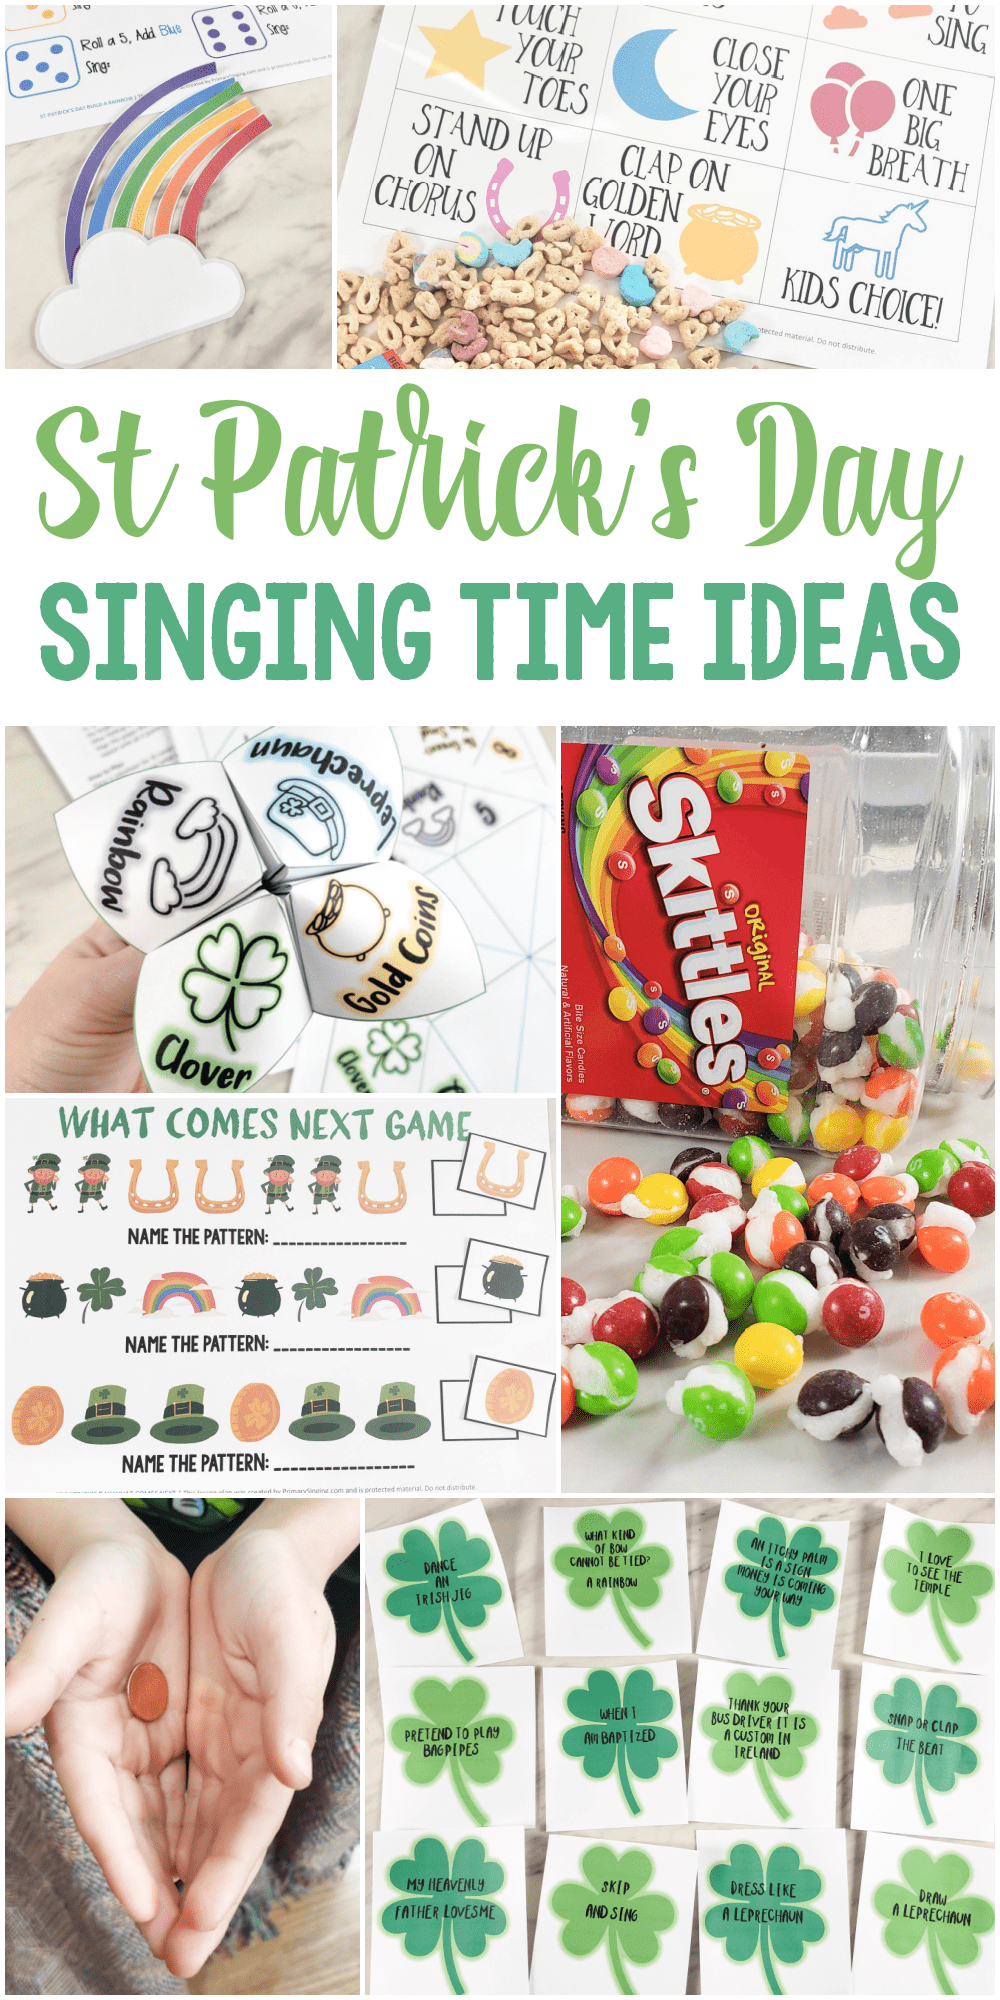 45 St Patrick's Day Primary Songs Easy singing time ideas for Primary Music Leaders St Patricks Day Singing Time Ideas